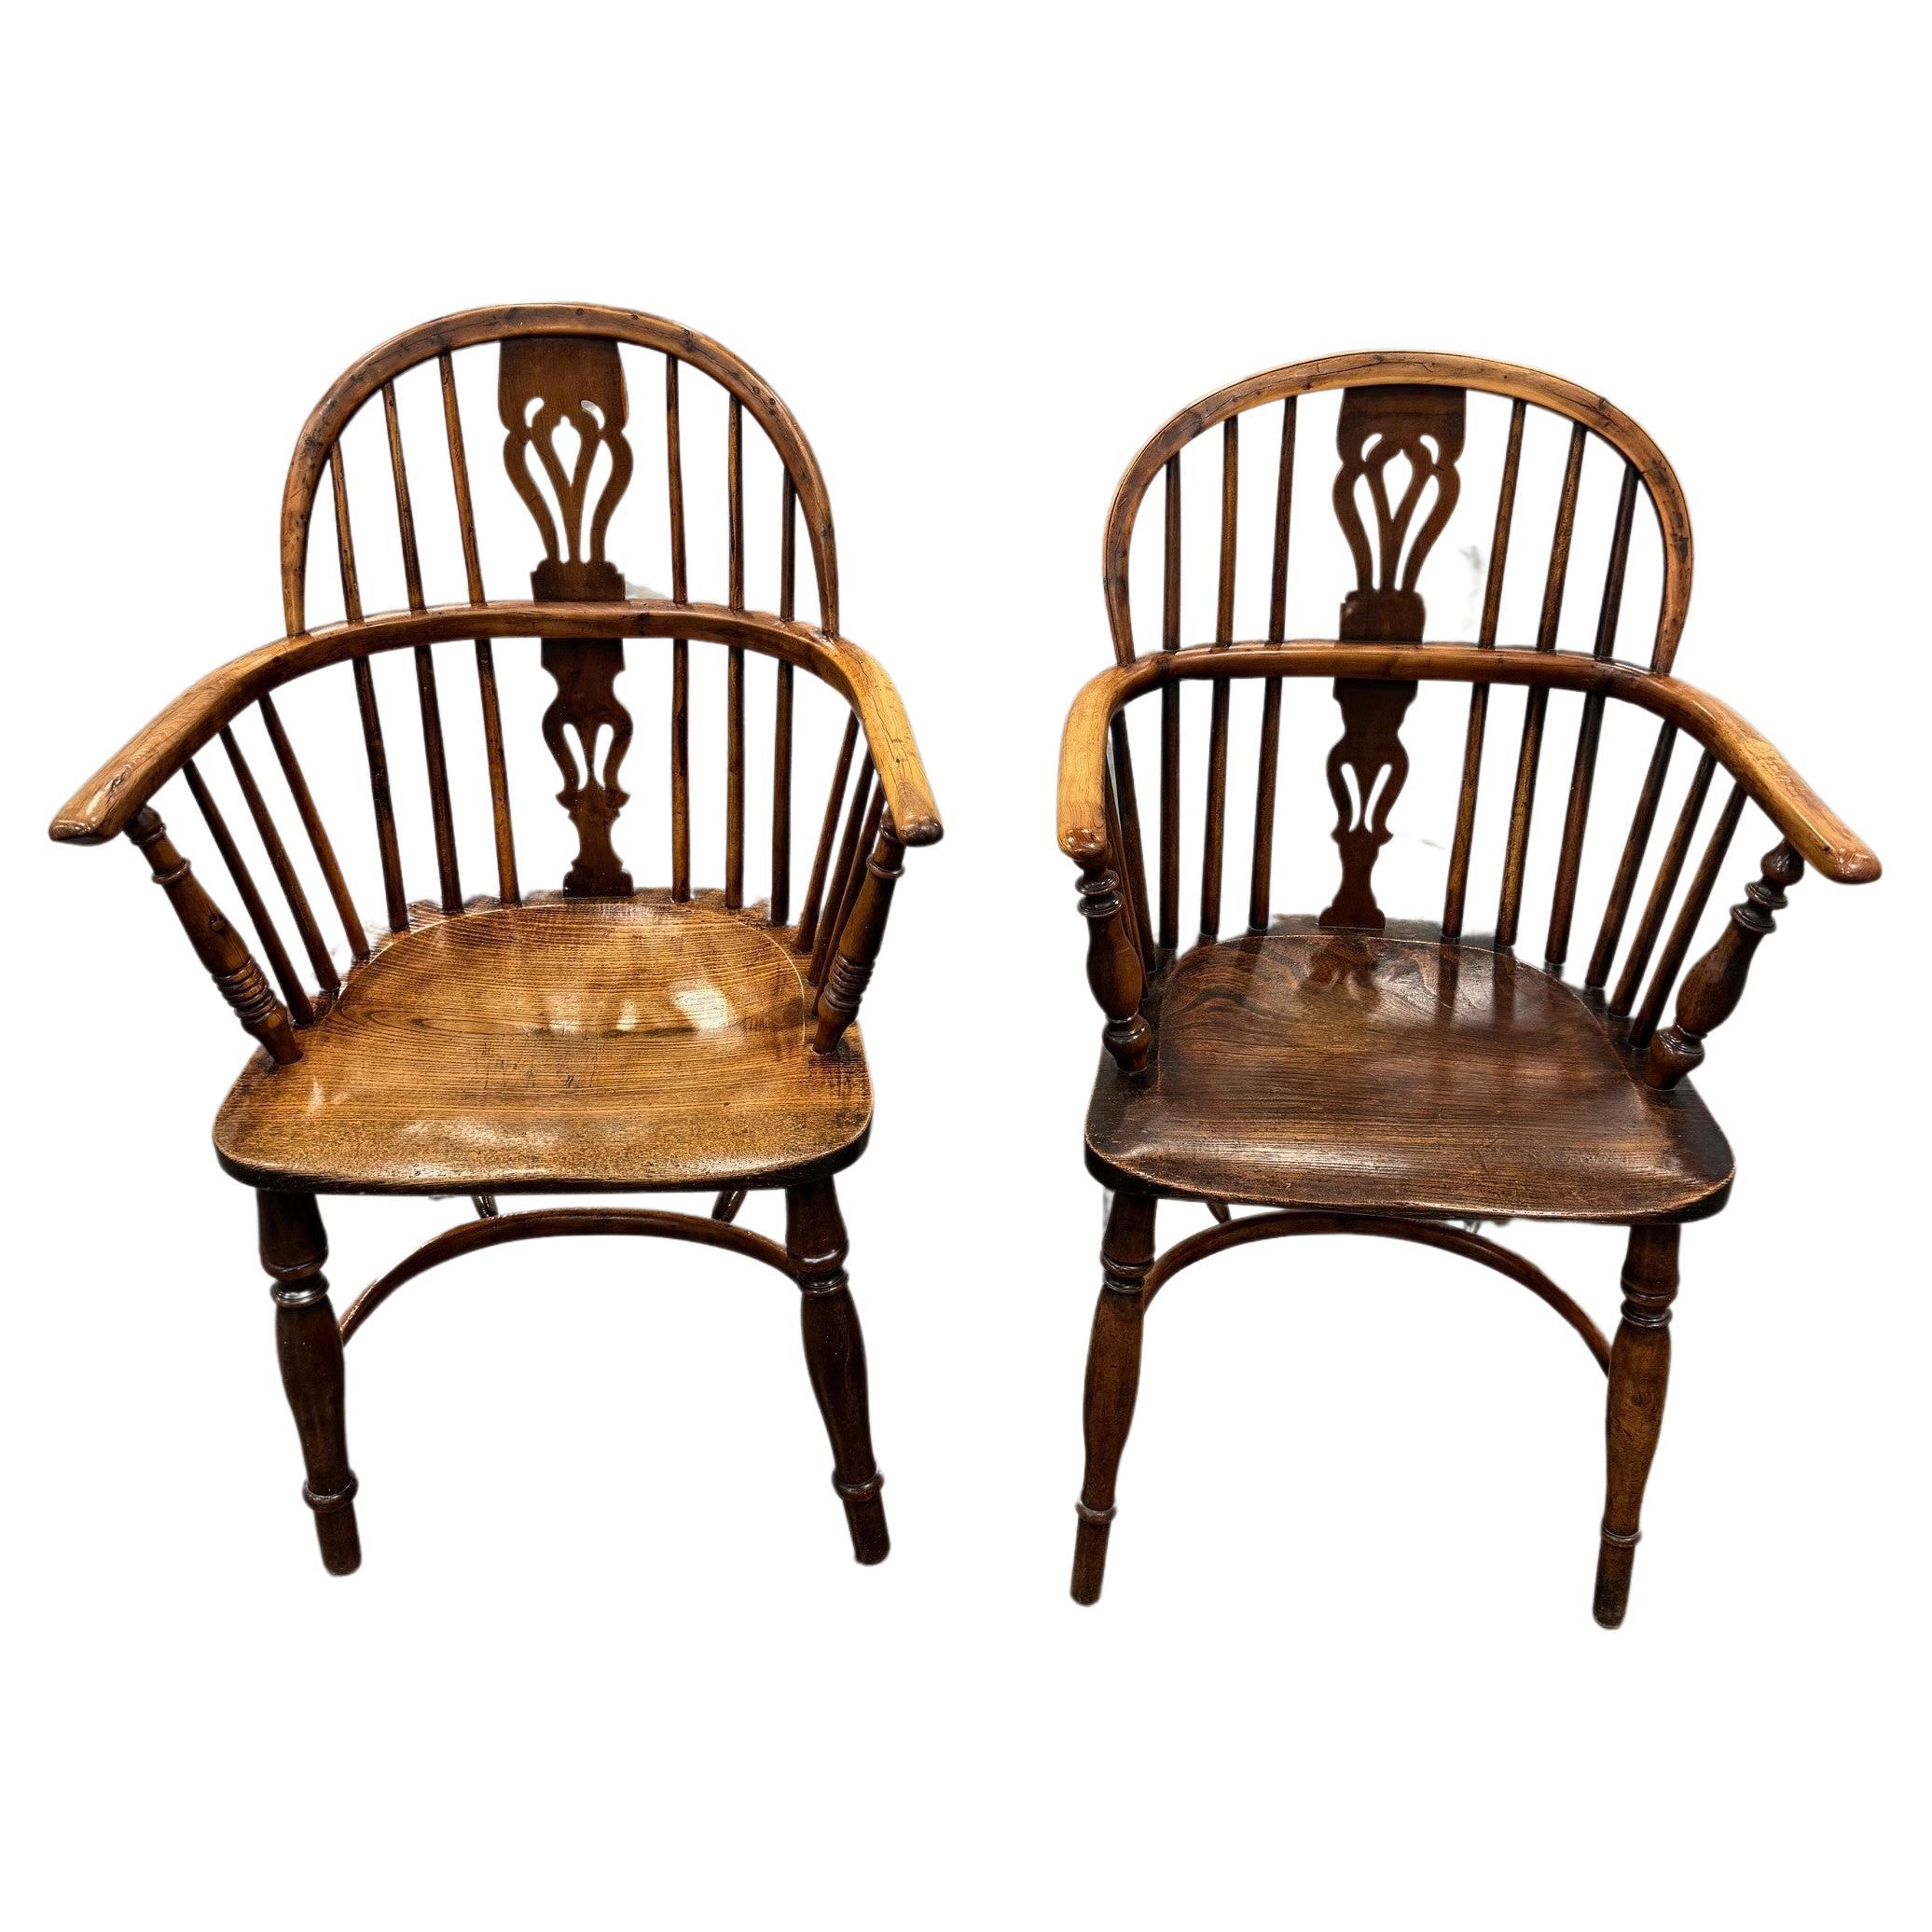 Matched Set of Two Early Low back Yew Wood Windsor Chairs For Sale